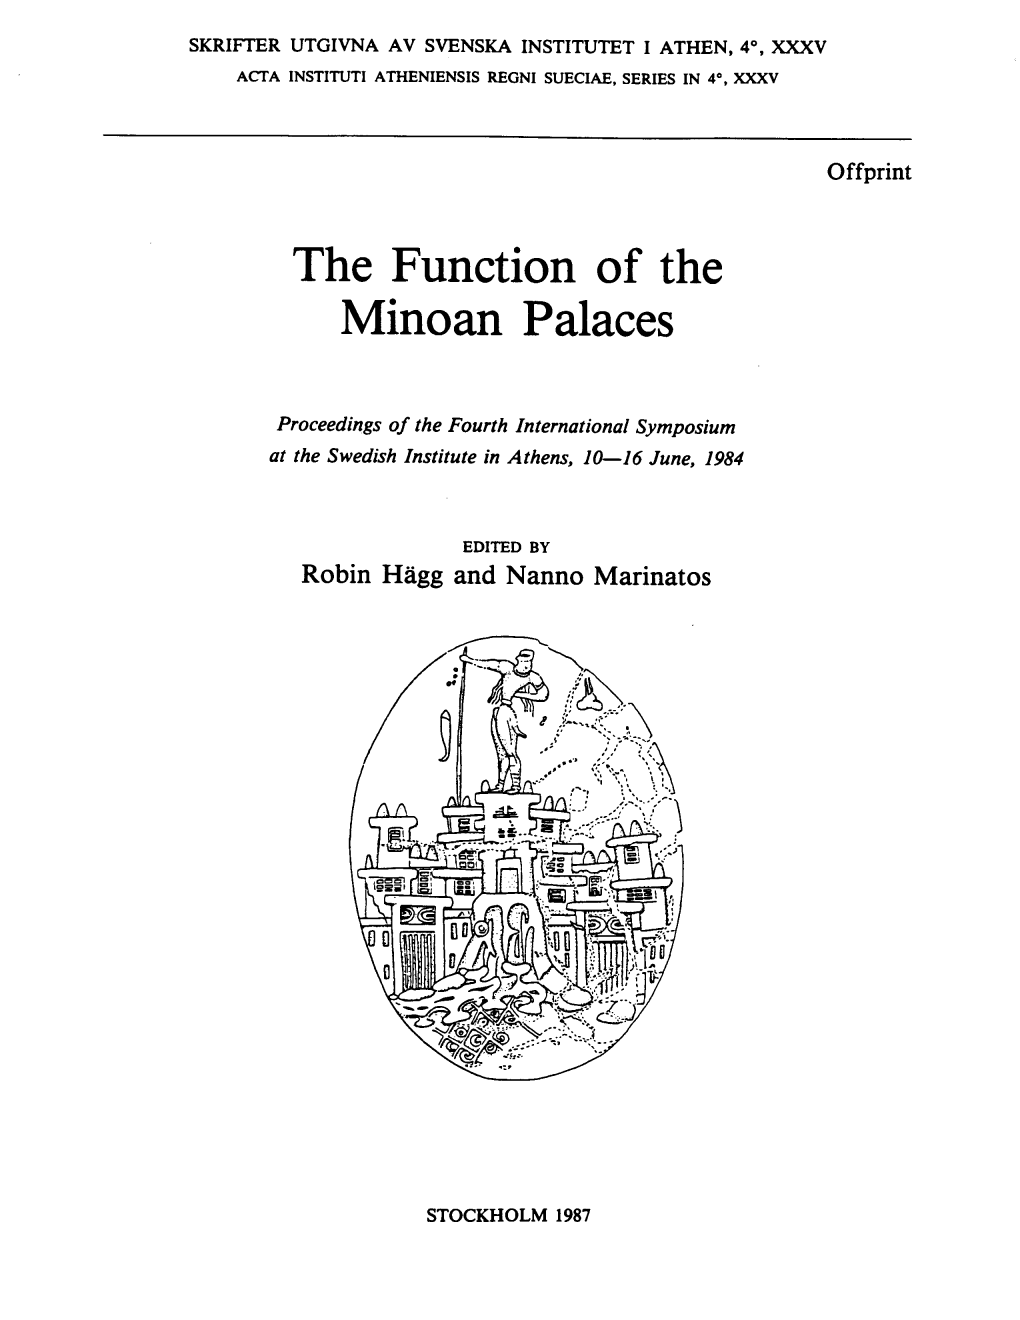 The Function of the Minoan Palaces